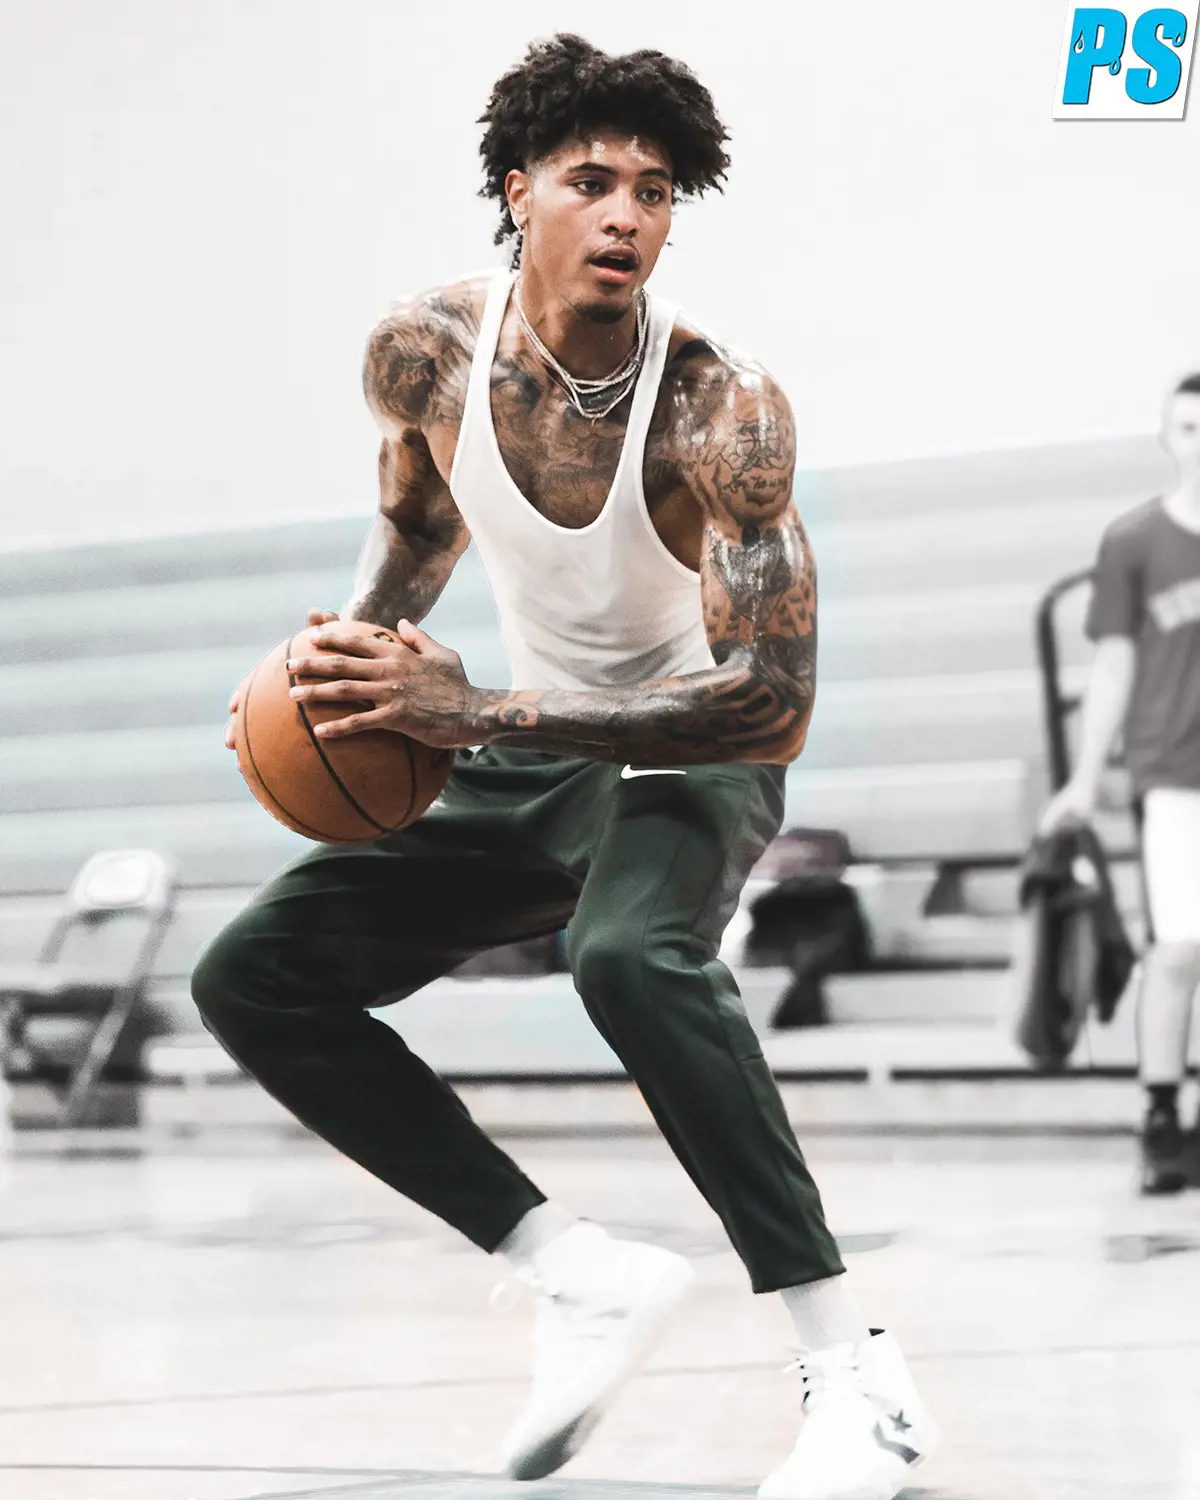 Kelly Oubre Jr. casually playing basketball in chains